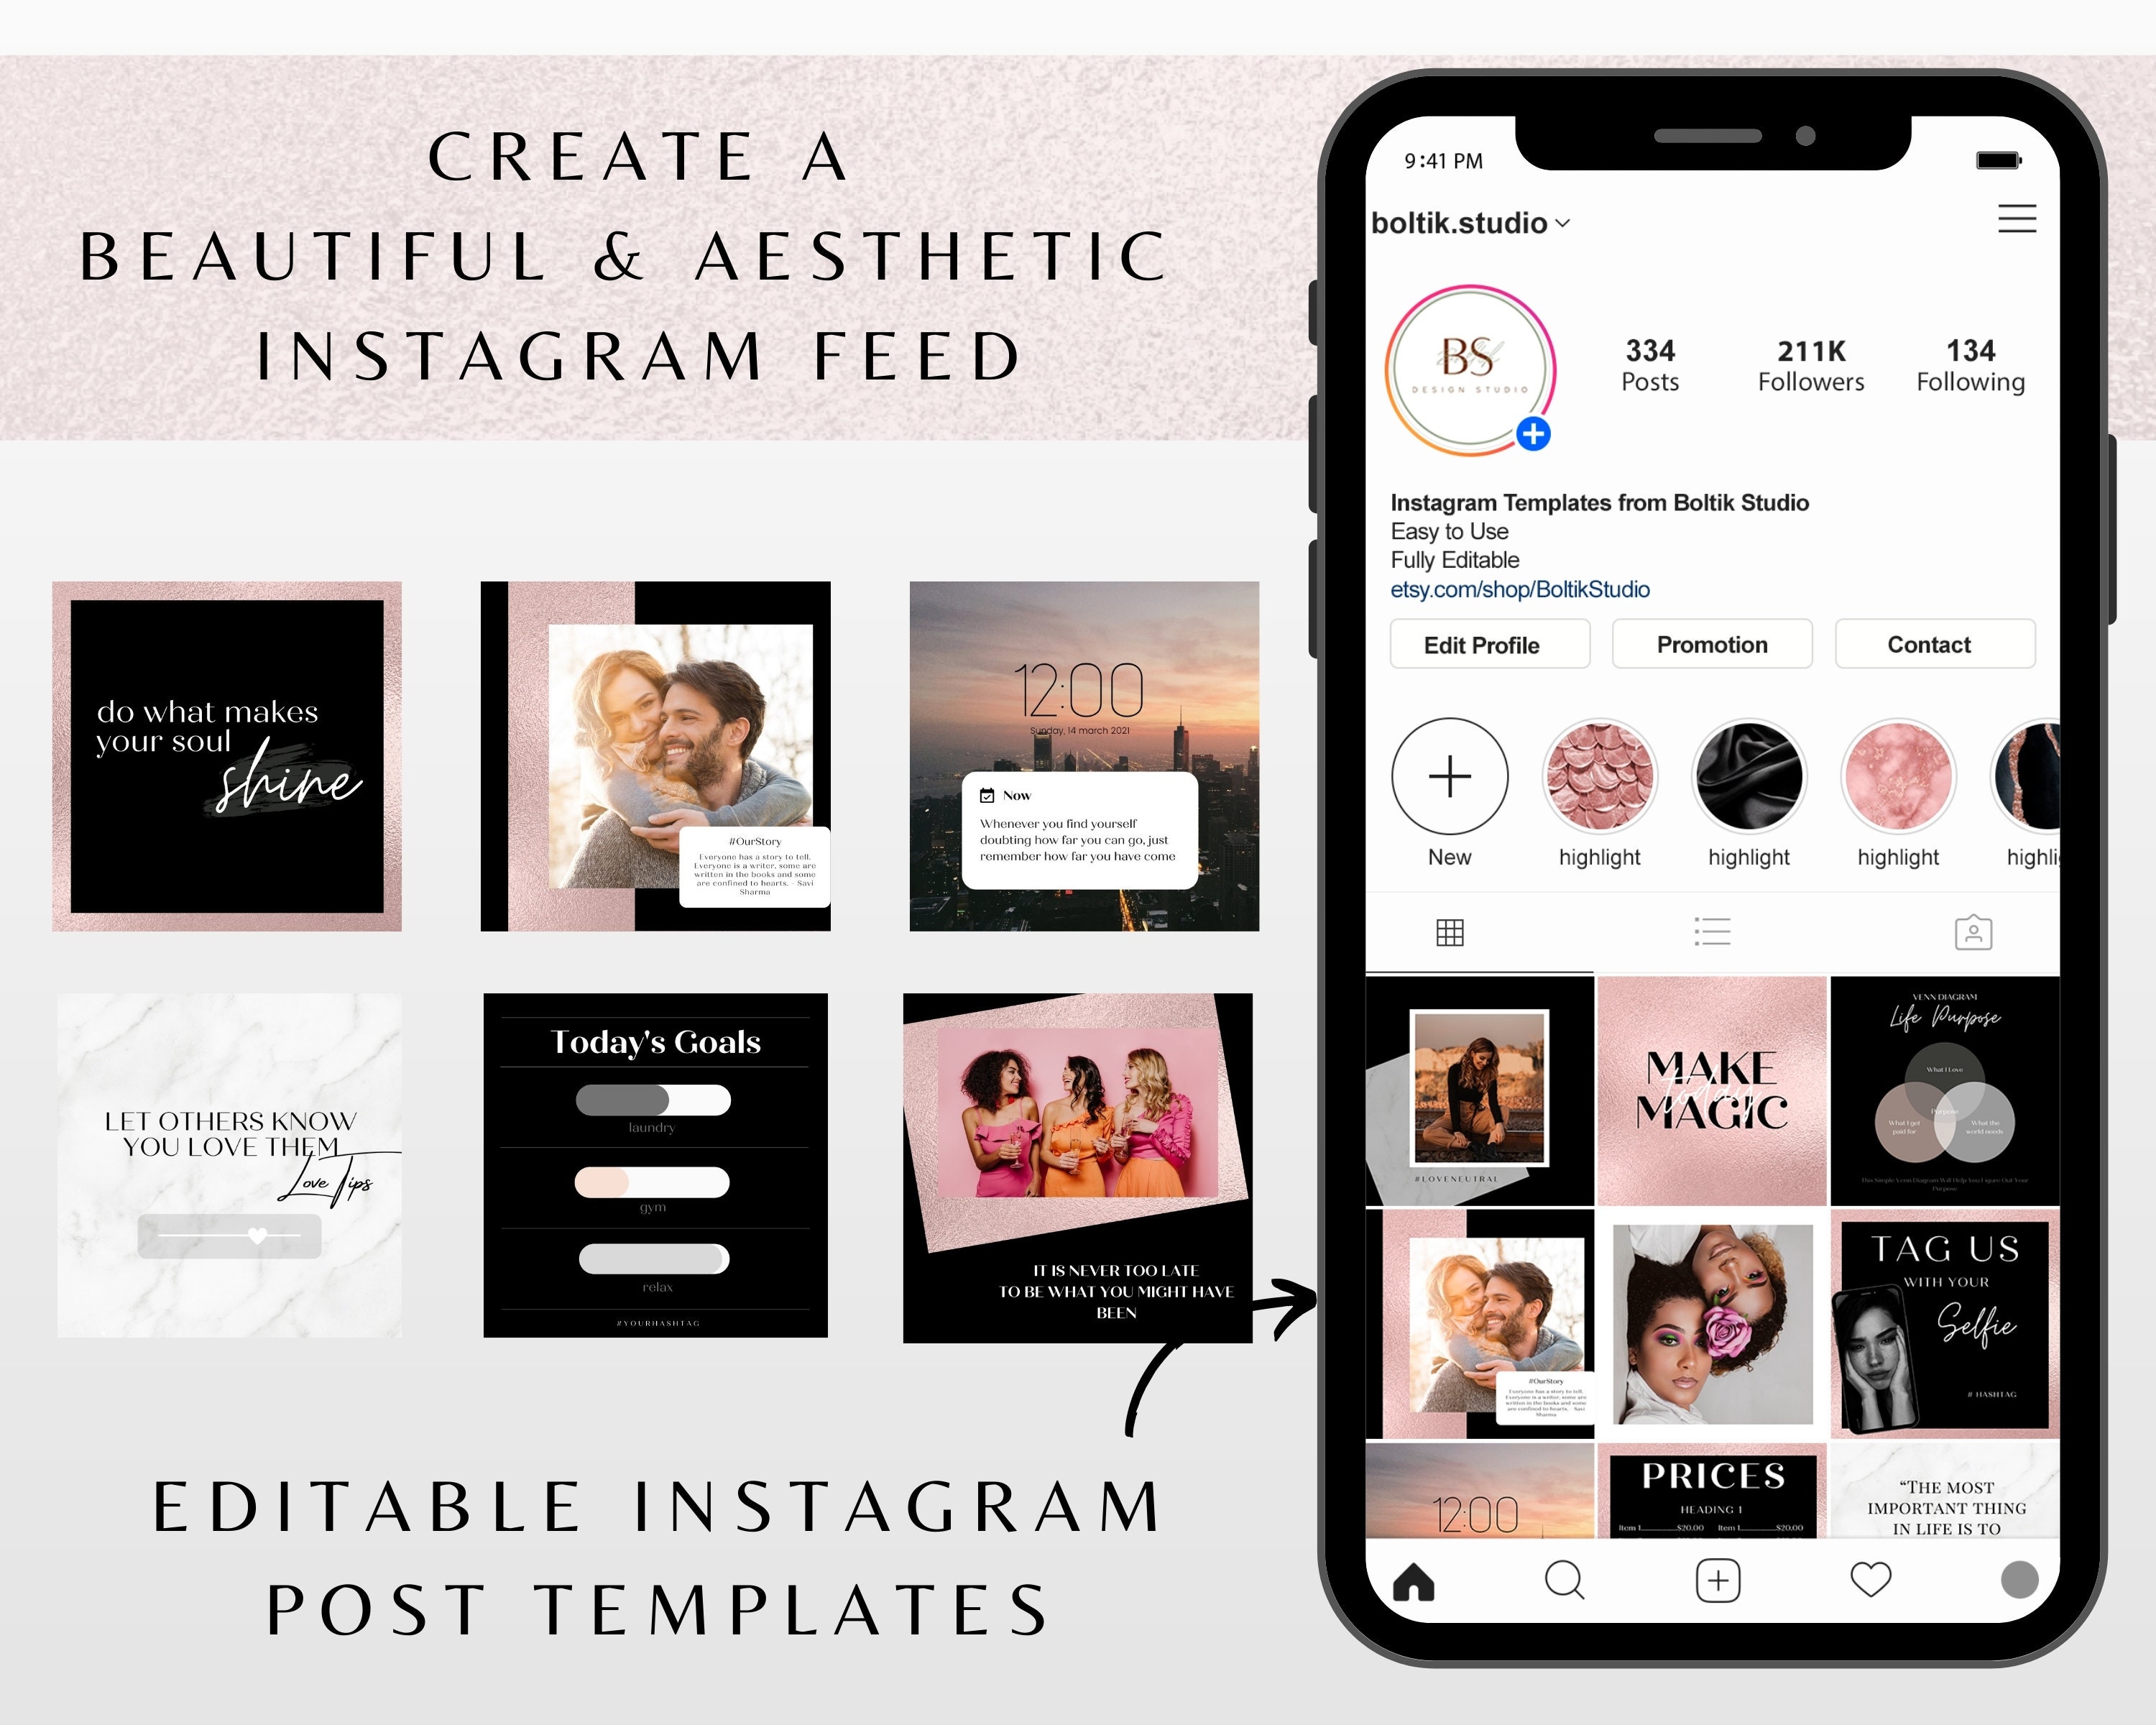 Where To Find Instagram Templates